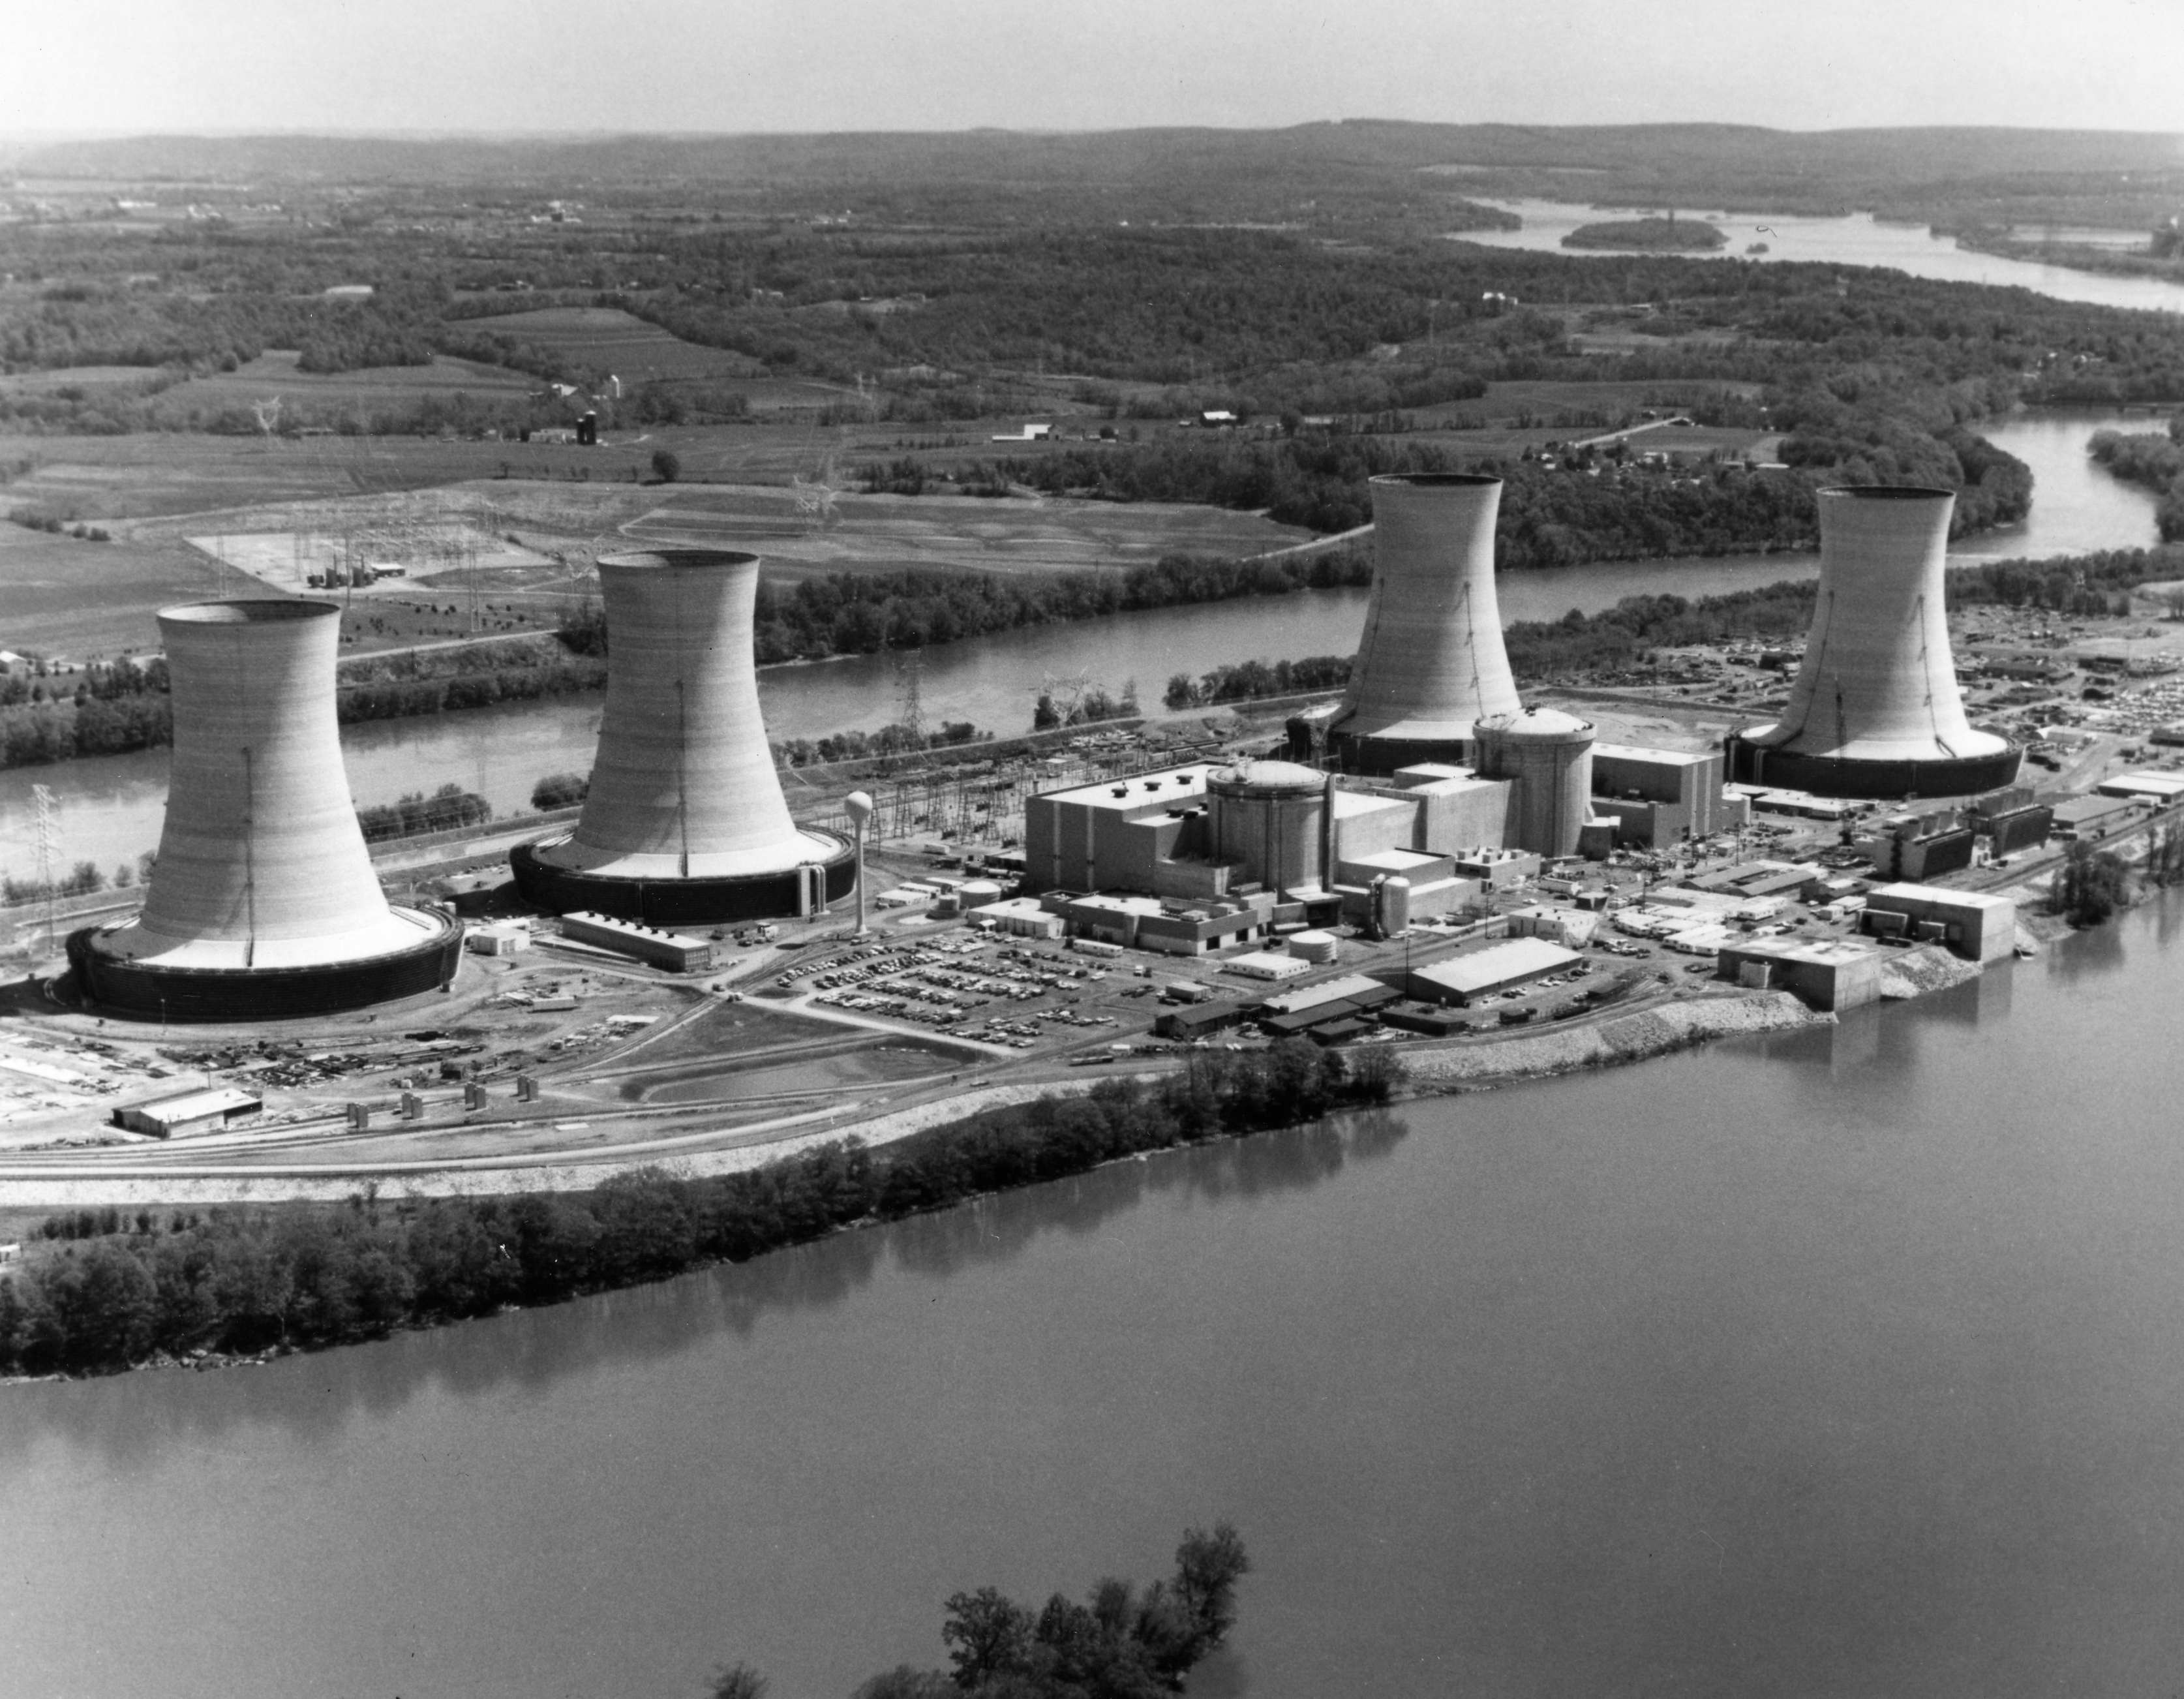 Three Mile Island Nuclear Power Plant in Londonderry, Pennsylvania.